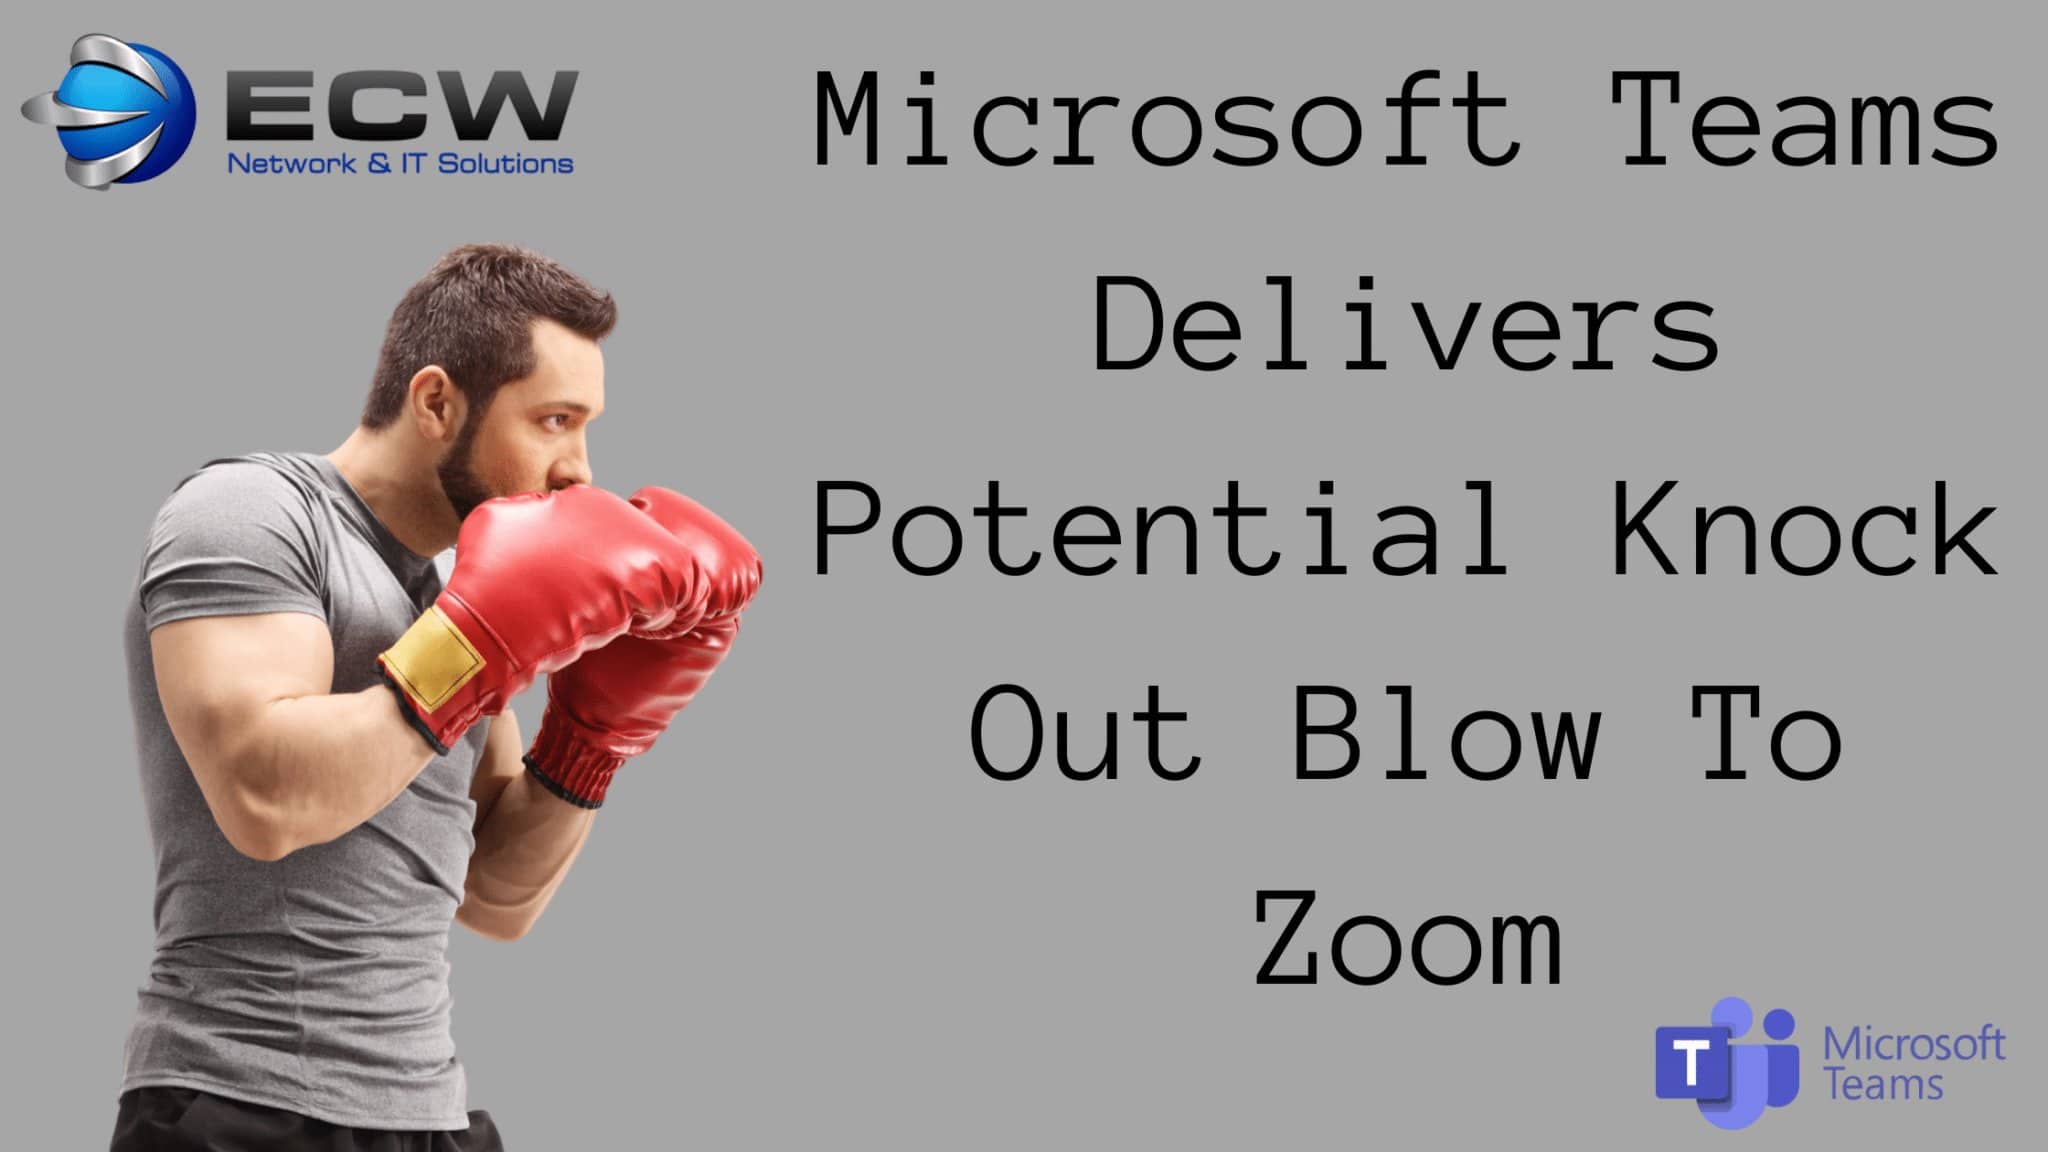 Microsoft Teams Delivers Potential Knock Out Blow To Zoom